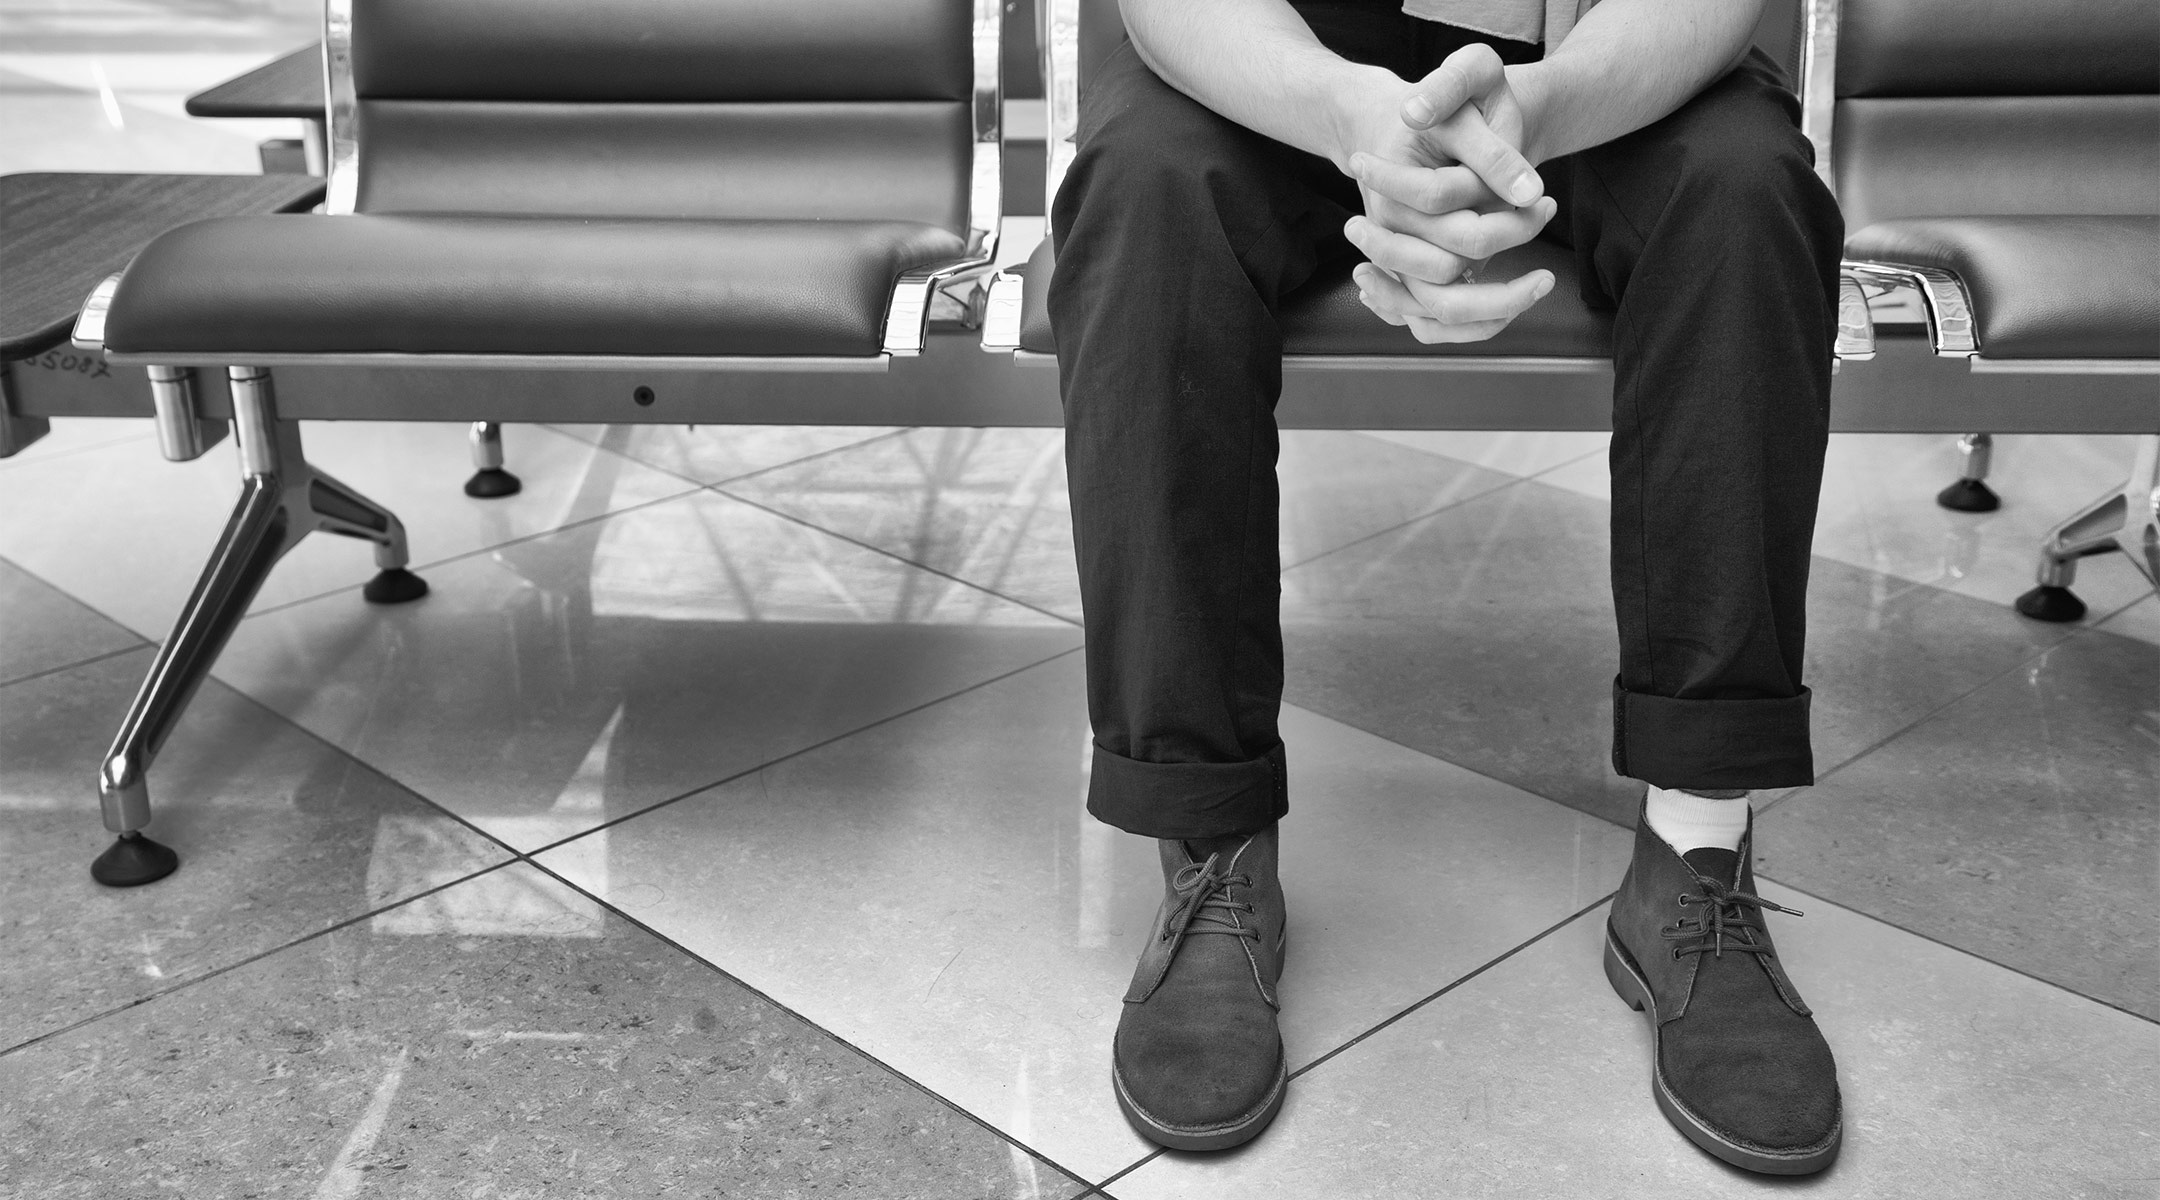 view of man's feet as he waits in the hospital